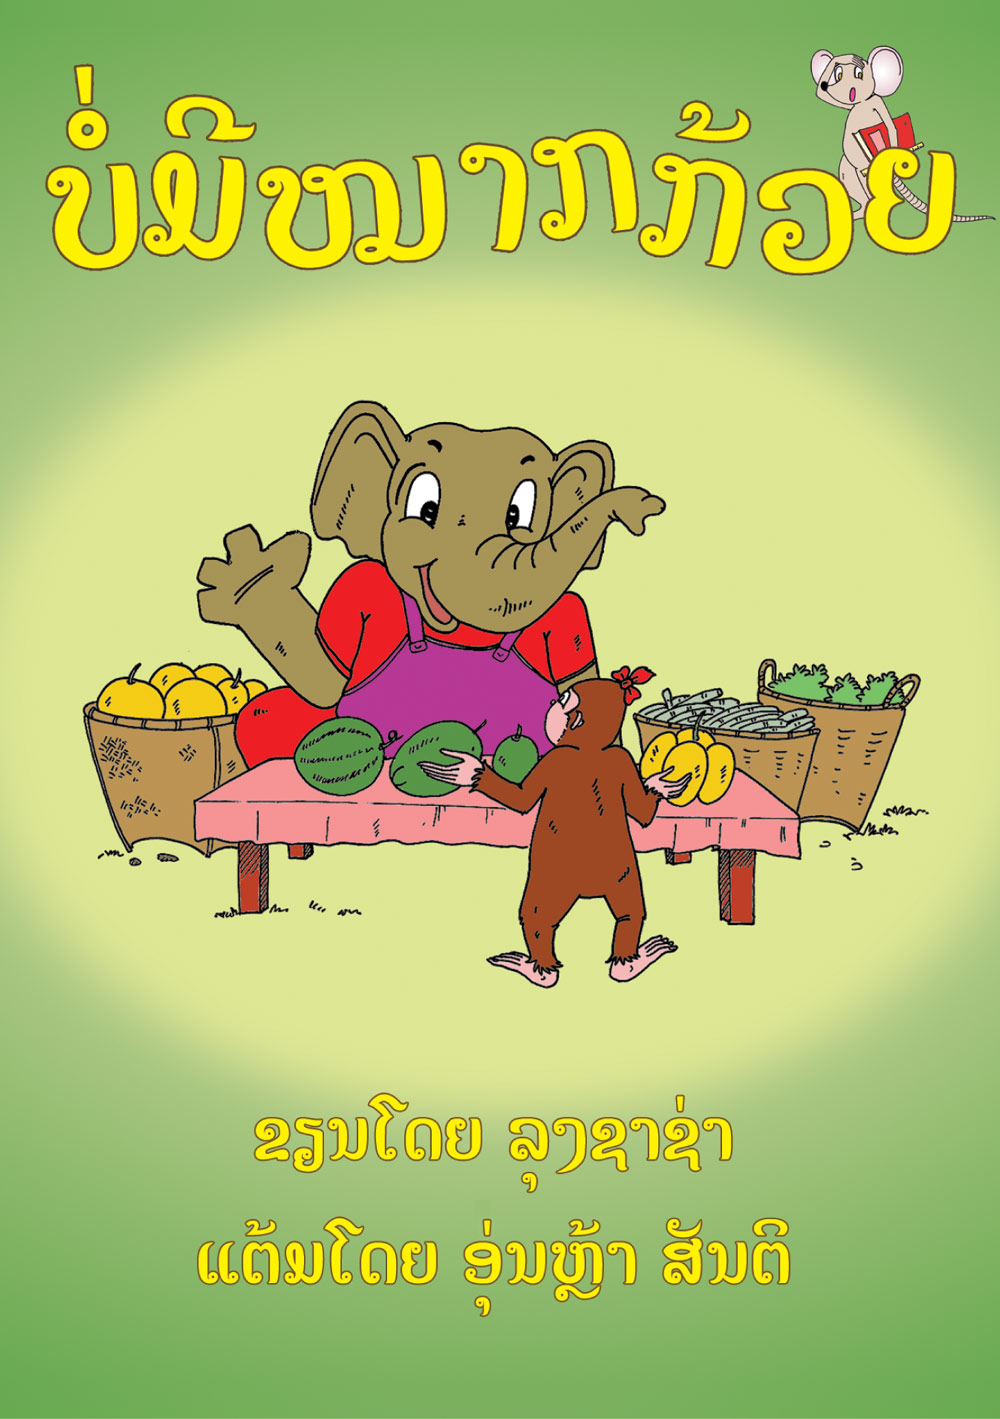 No Bananas large book cover, published in Lao language